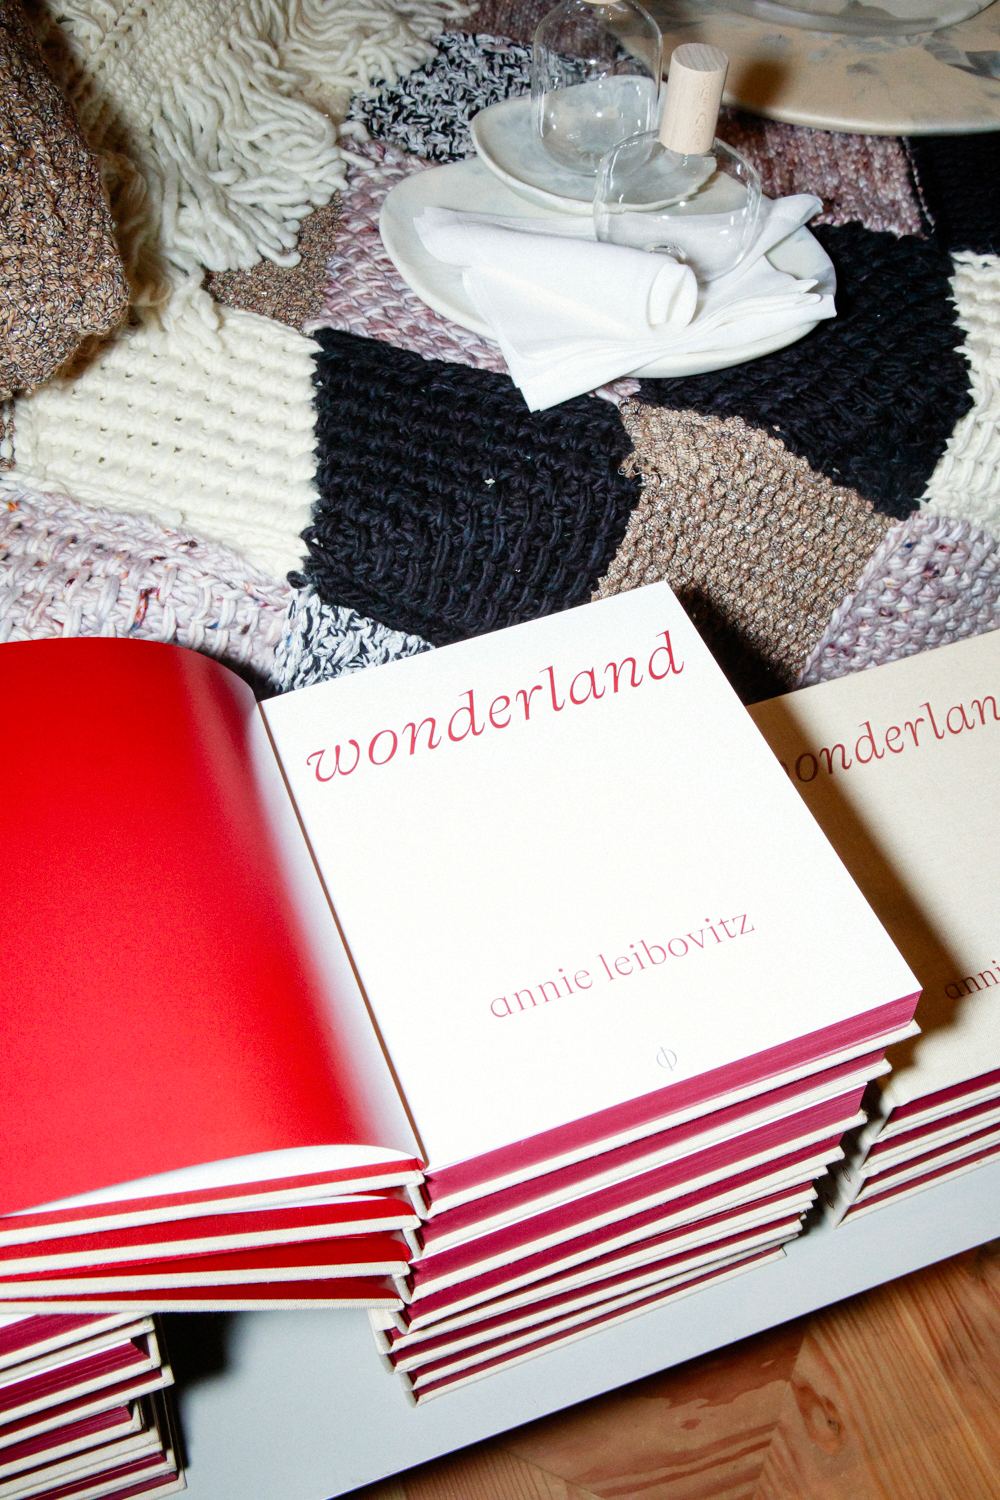 Copies of Wonderland at the Annie Leibovitz Wonderland book launch at MATCHESFASHION, 3 Carlos Place, London - photo by James D. Kelly